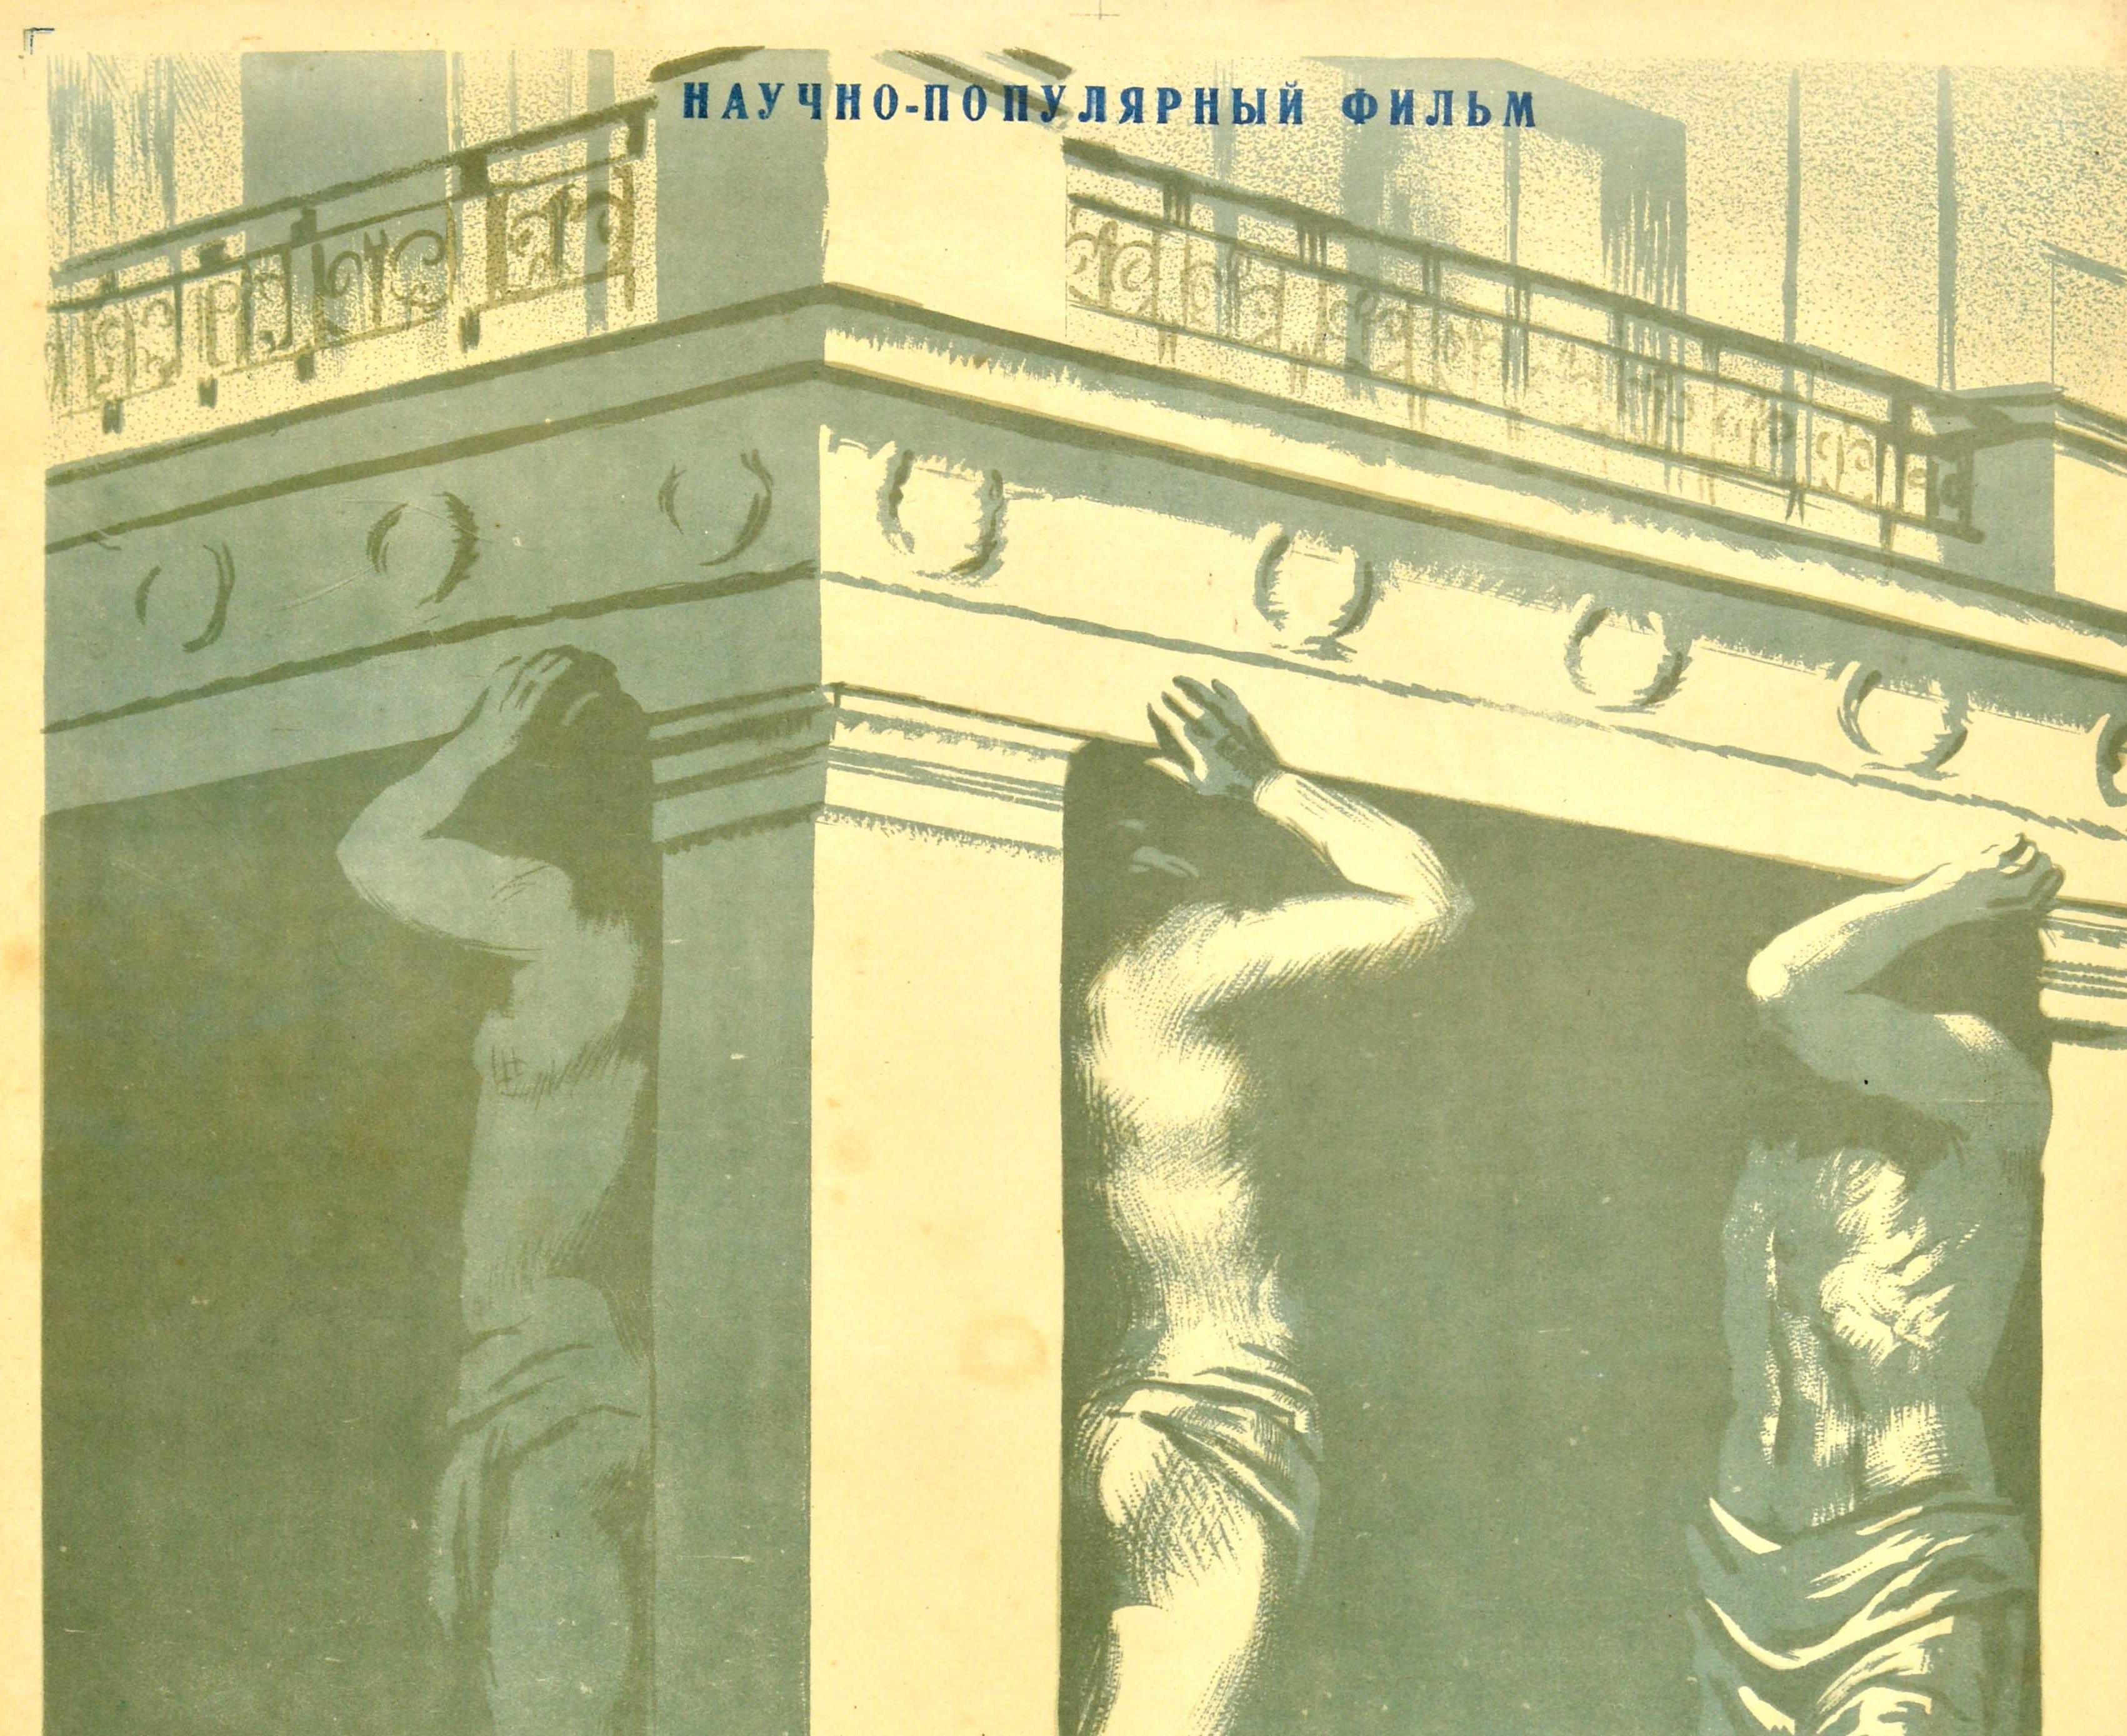 Original vintage Soviet film poster about the State Hermitage / ??????????????? ??????? featuring the five metre high Atlas statues at the historical portico entrance of the New Hermitage building in St Petersburg Russia. Founded in 1764 by the